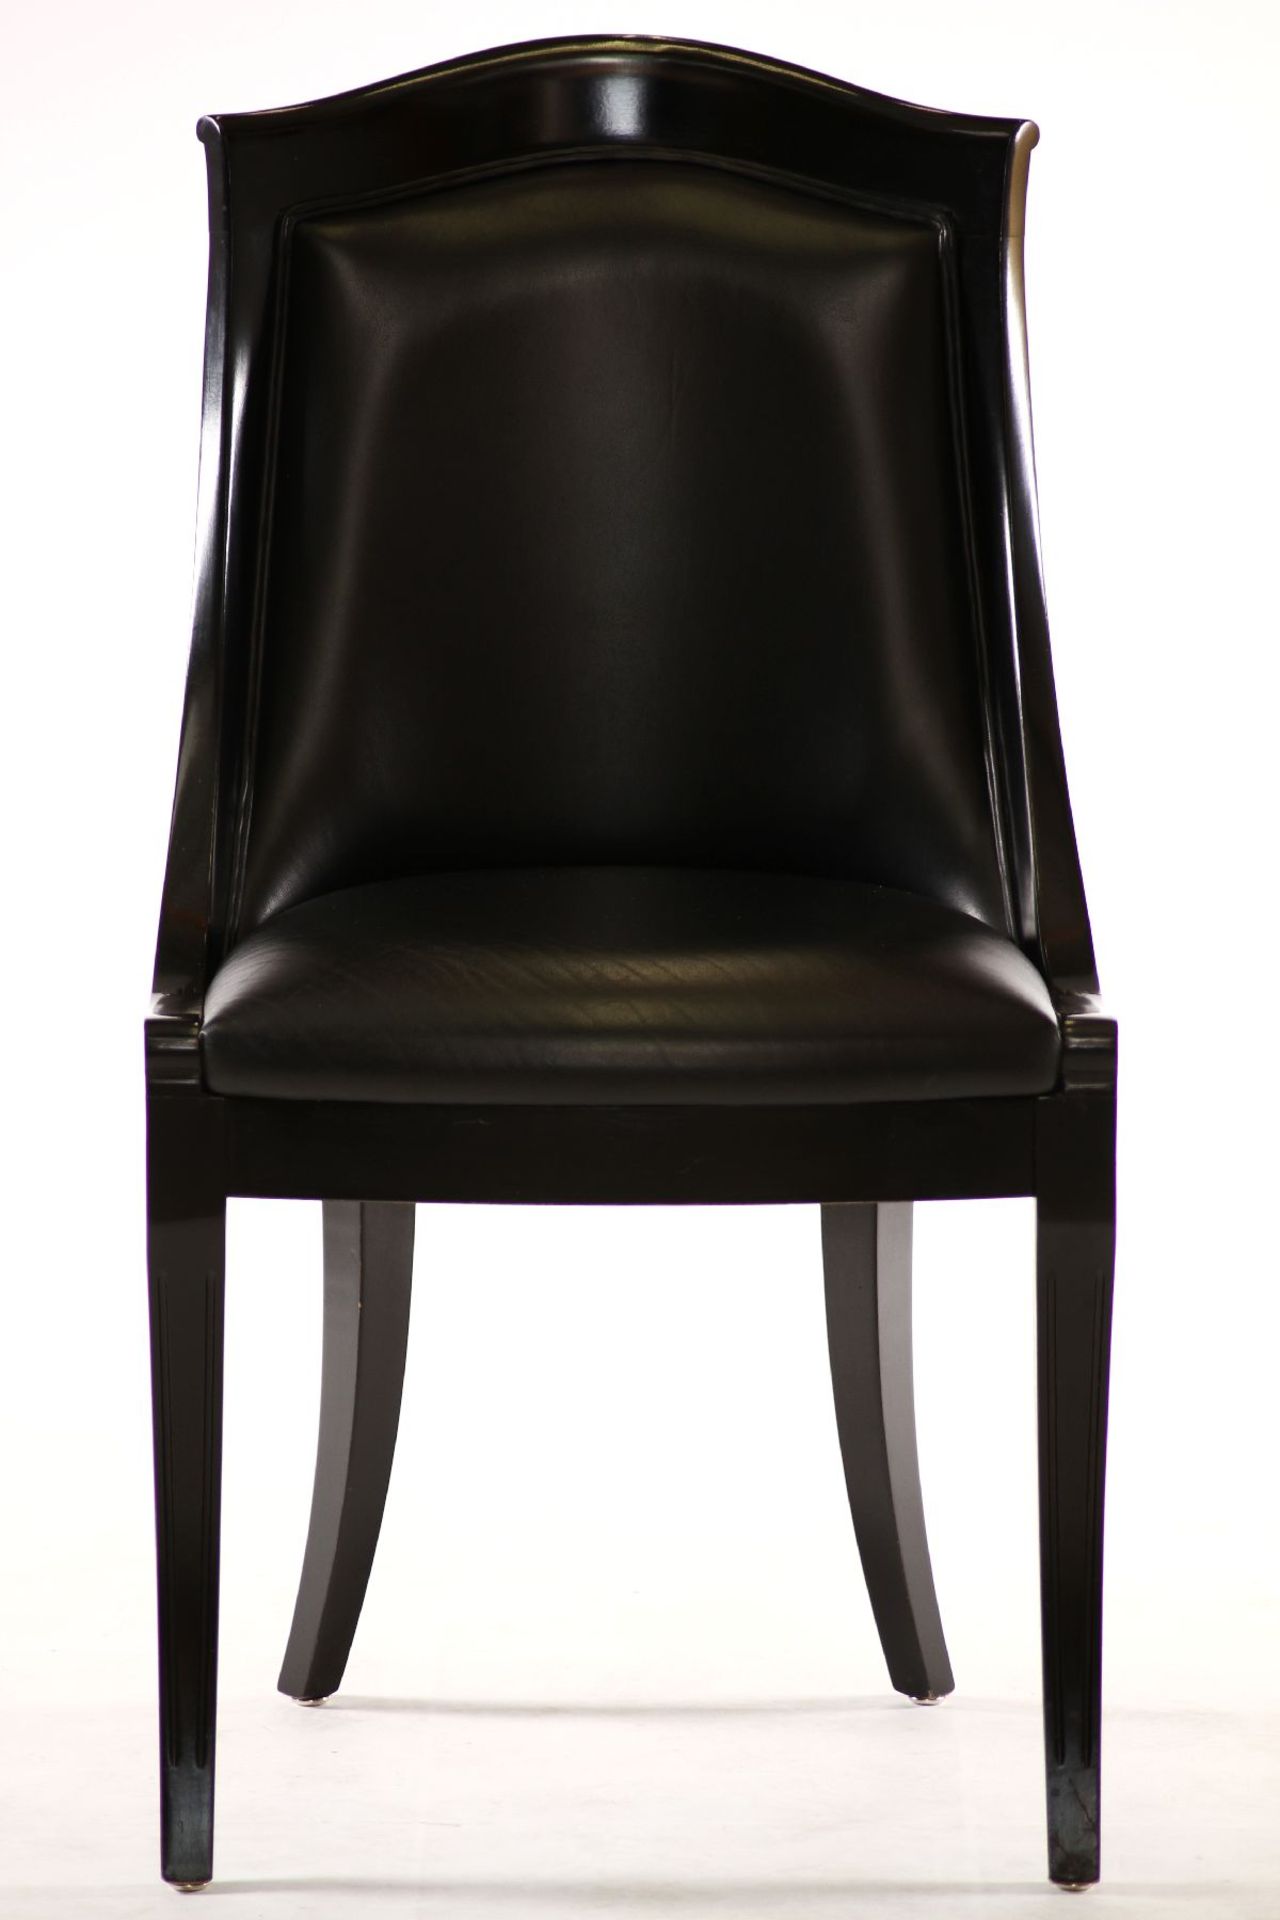 4 chairs, in Art Deco style, solid wood frames, black lacquered, black leather covers,comfortable - Bild 2 aus 3